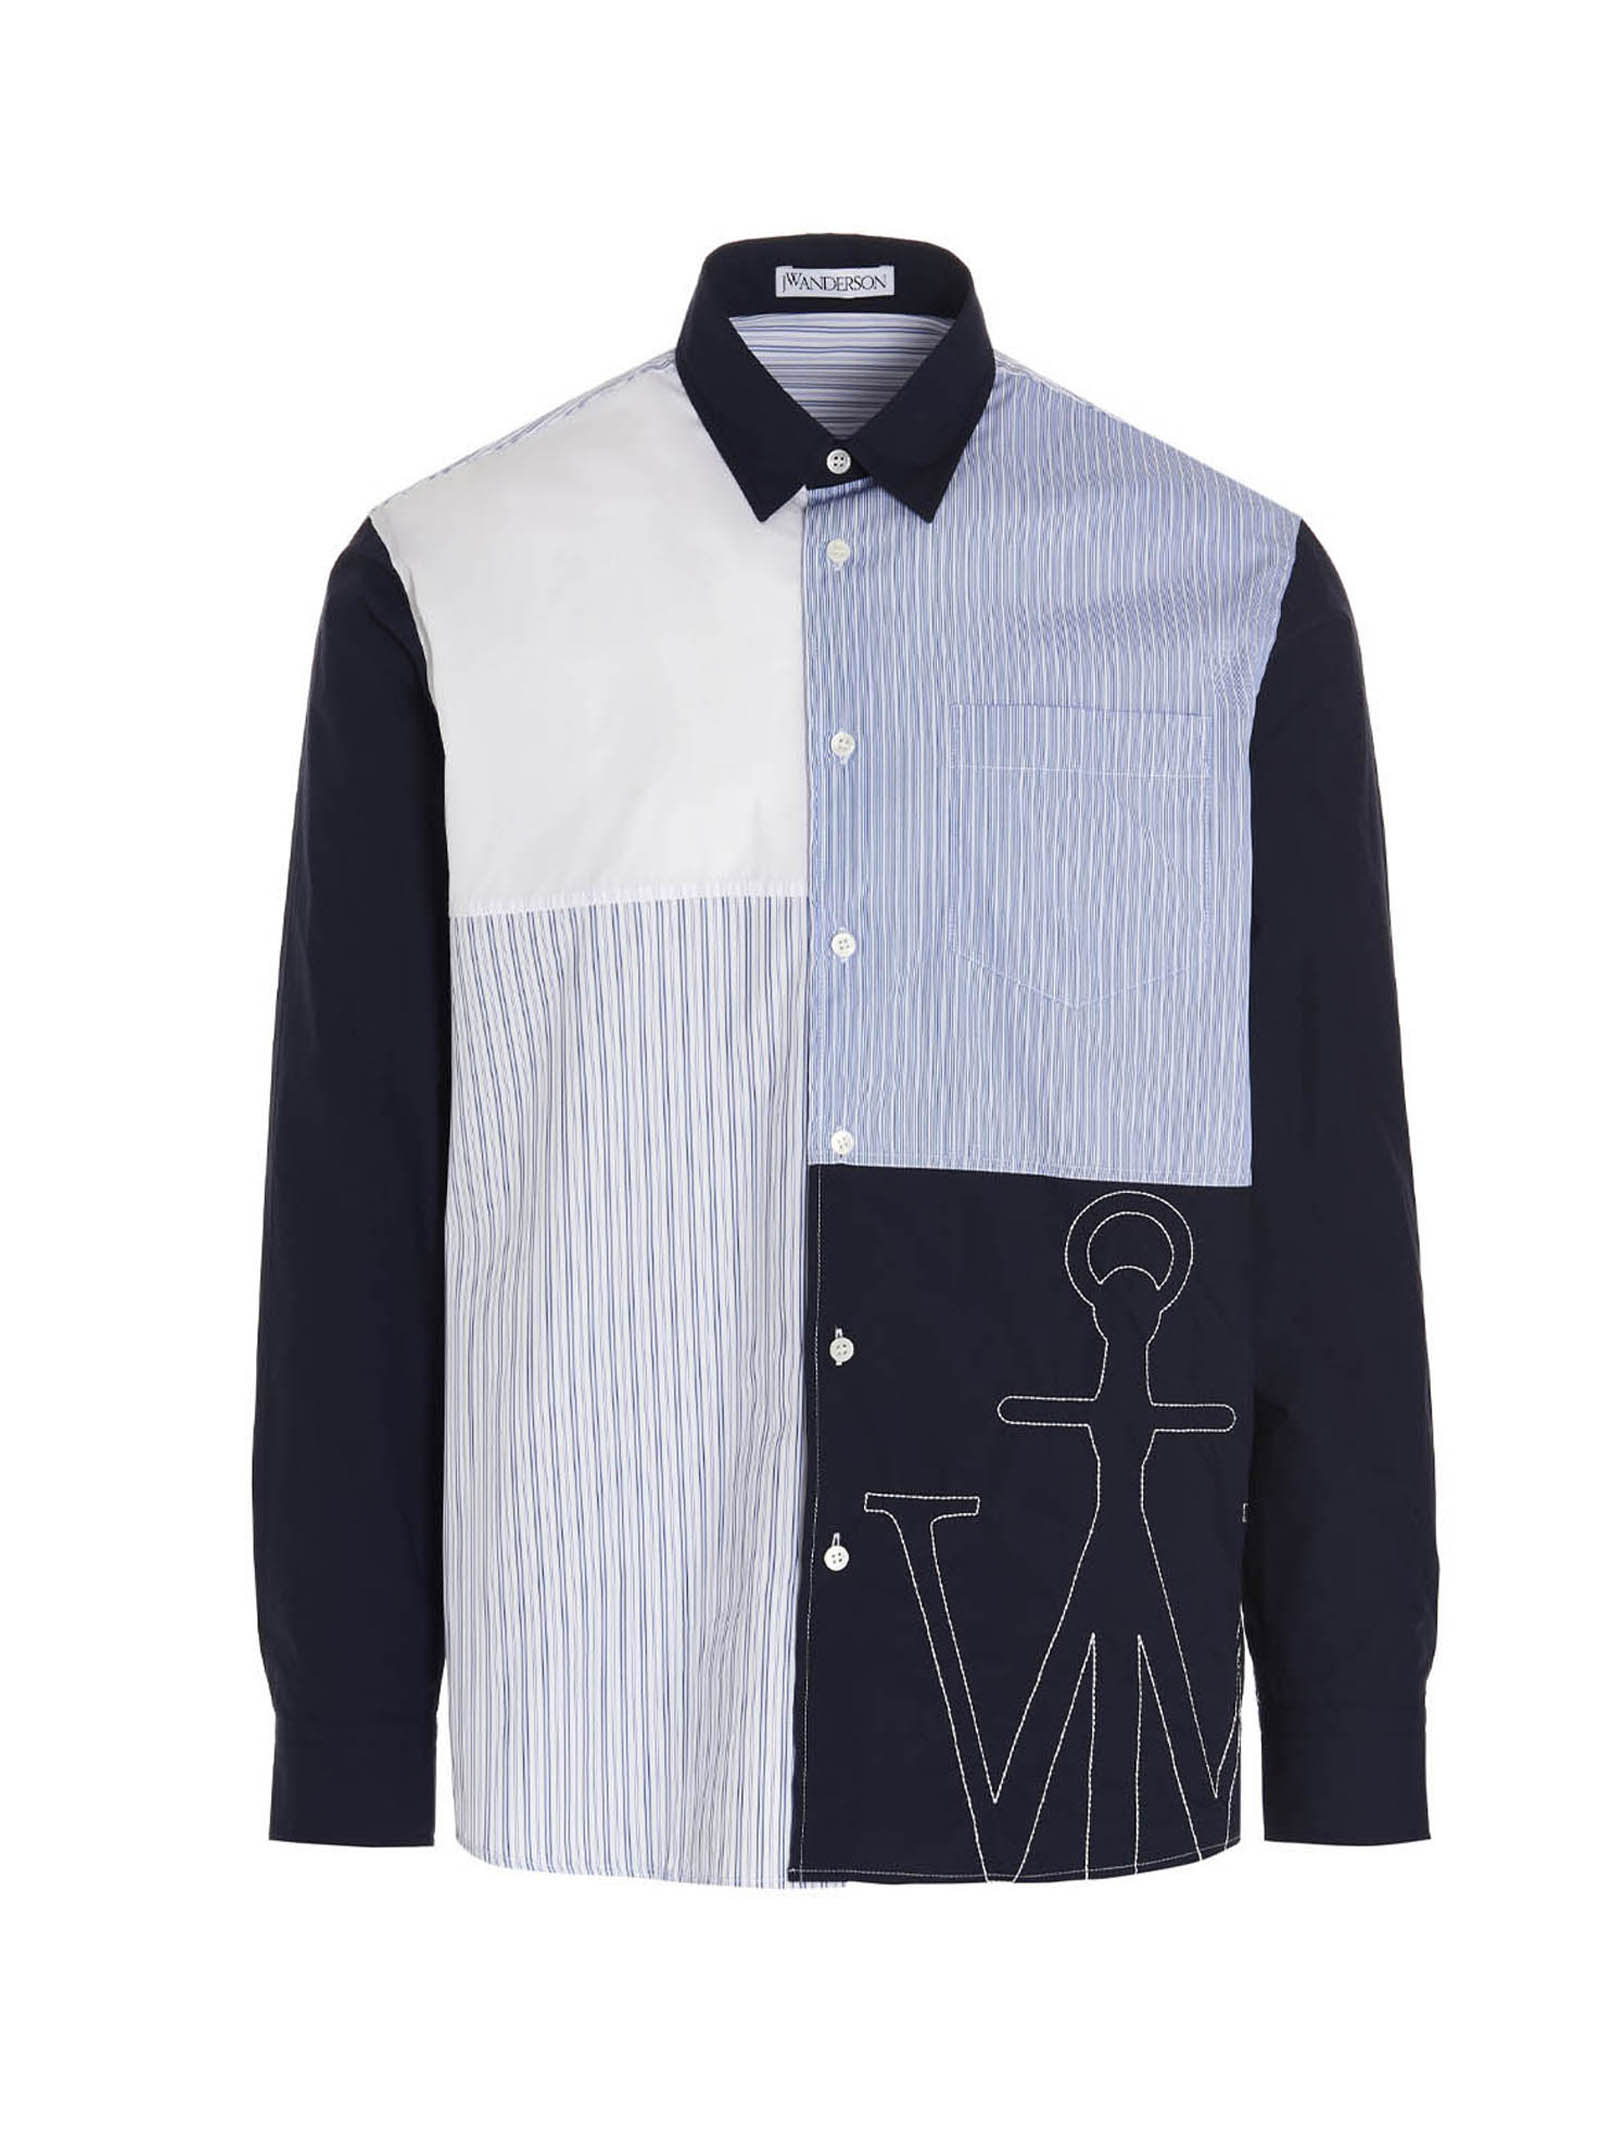 J.w. Anderson relaxed Patchwork Shirt